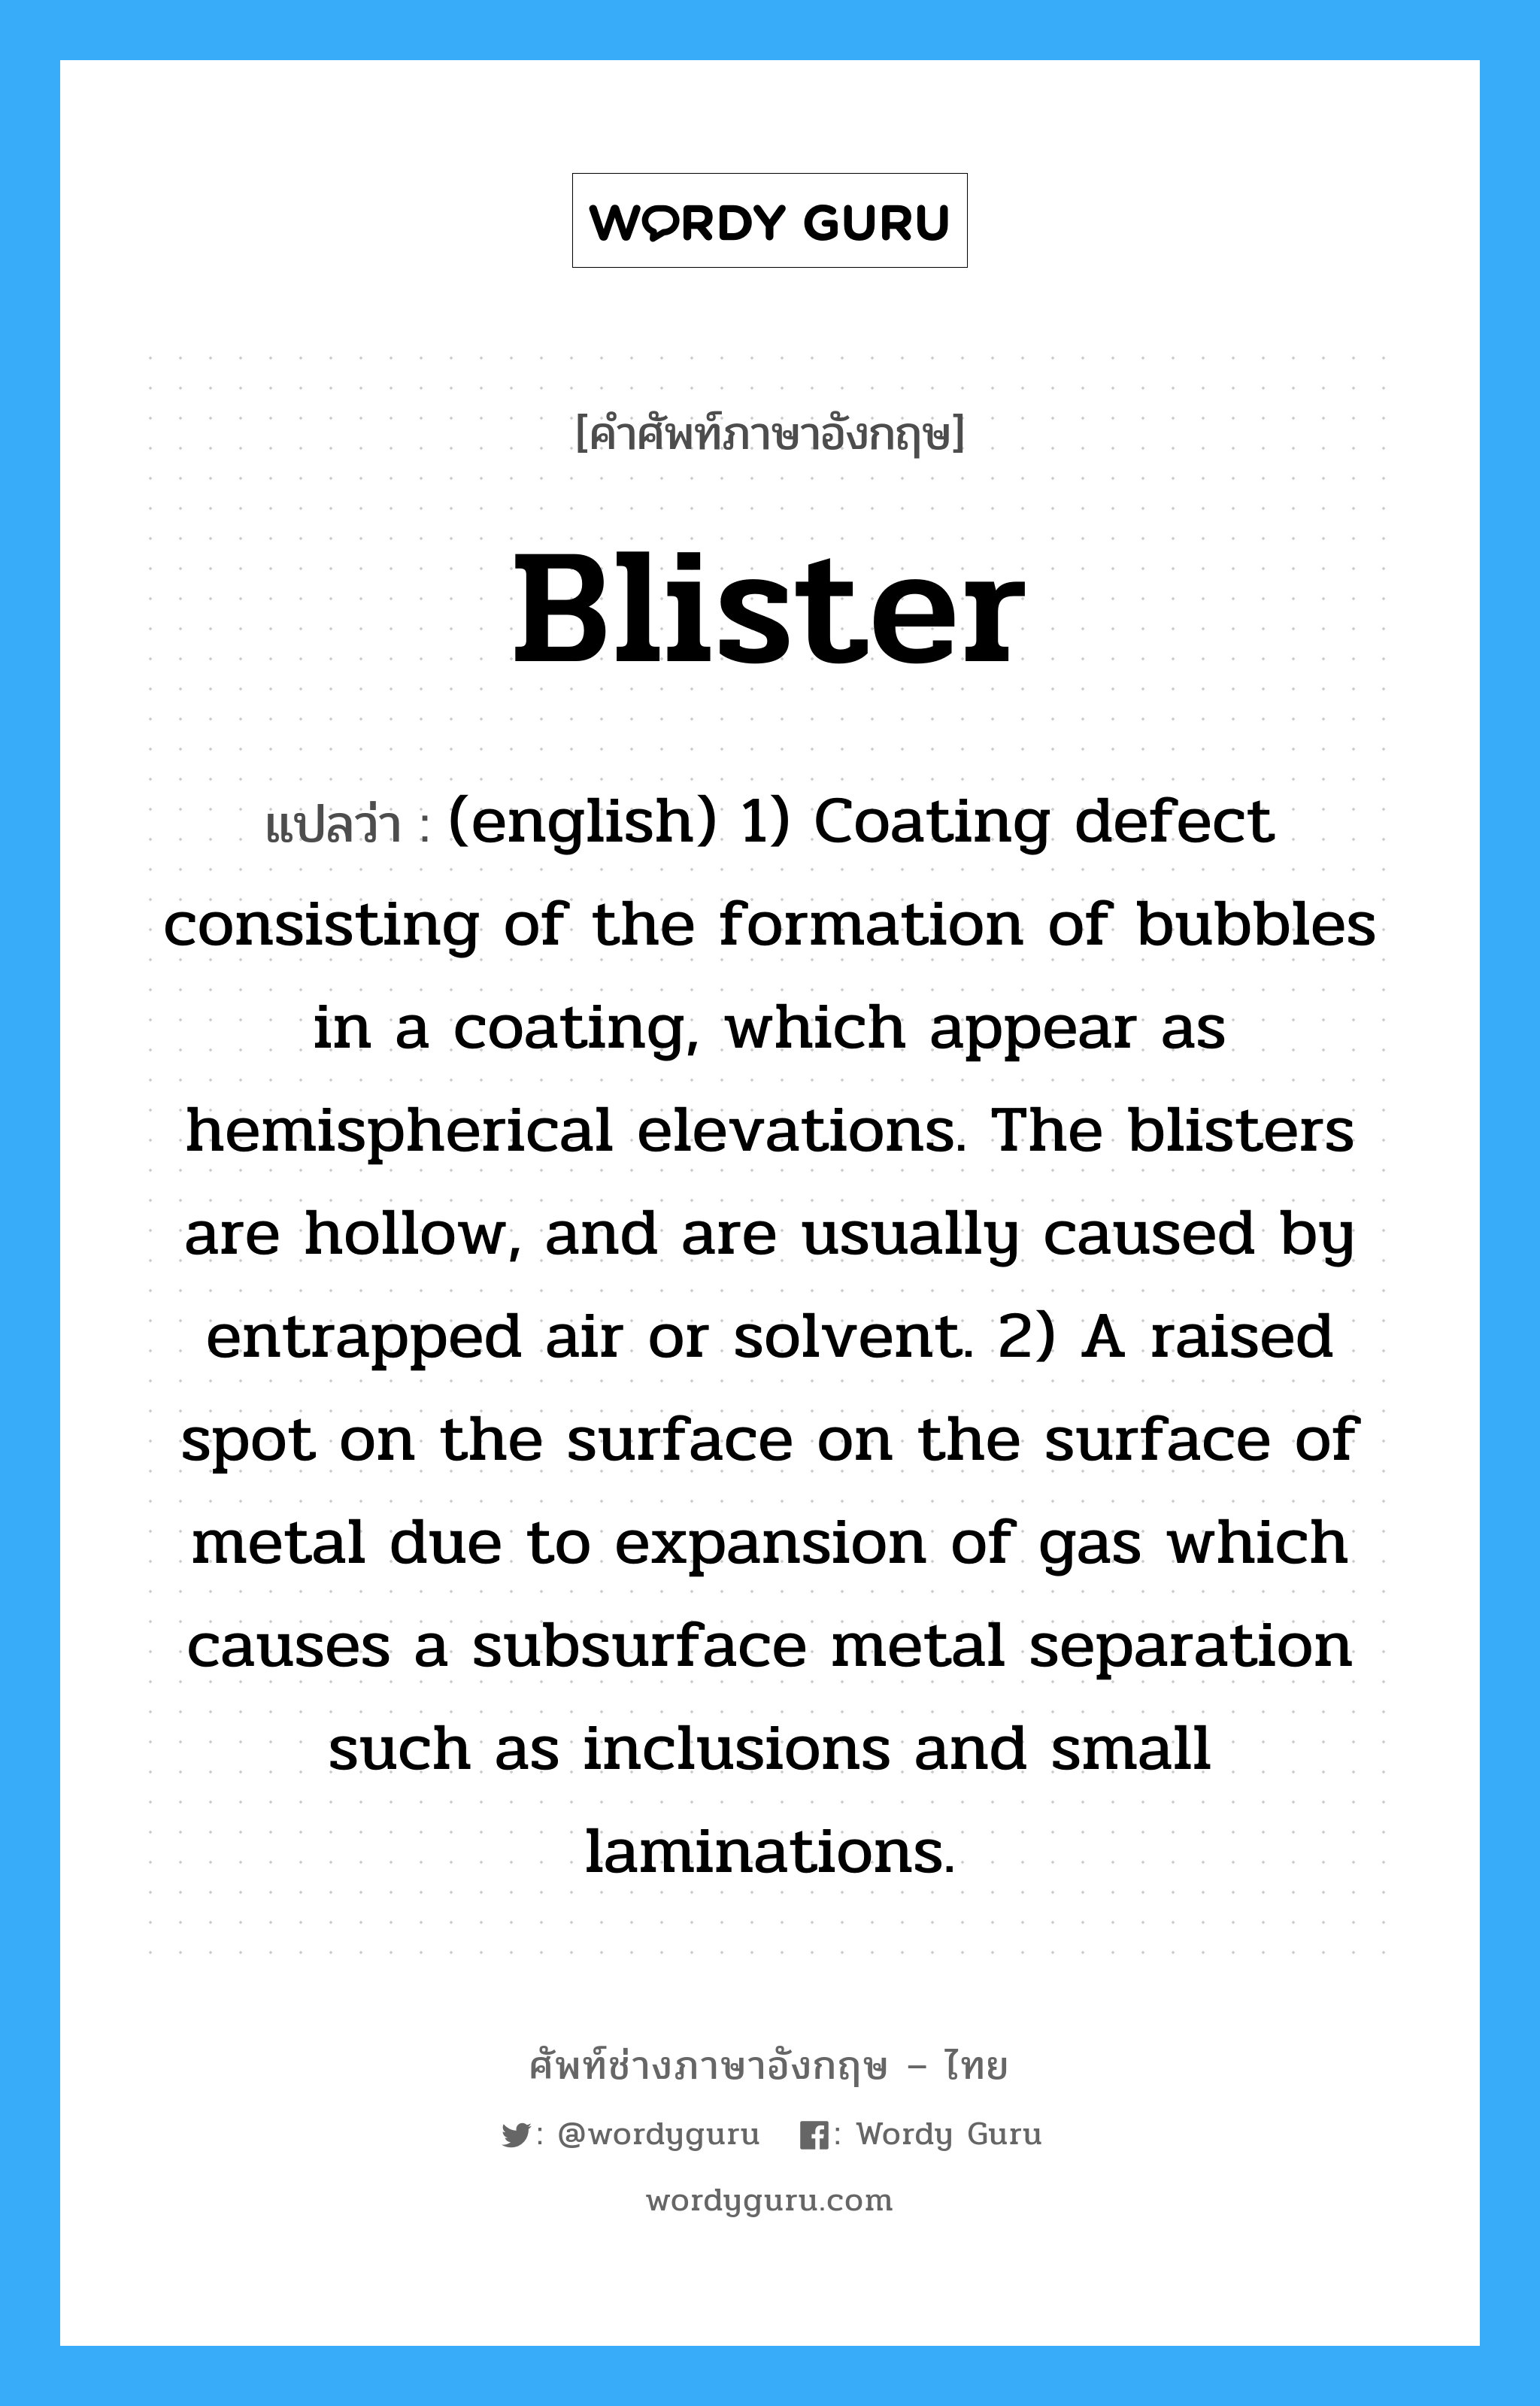 Blister แปลว่า?, คำศัพท์ช่างภาษาอังกฤษ - ไทย Blister คำศัพท์ภาษาอังกฤษ Blister แปลว่า (english) 1) Coating defect consisting of the formation of bubbles in a coating, which appear as hemispherical elevations. The blisters are hollow, and are usually caused by entrapped air or solvent. 2) A raised spot on the surface on the surface of metal due to expansion of gas which causes a subsurface metal separation such as inclusions and small laminations.